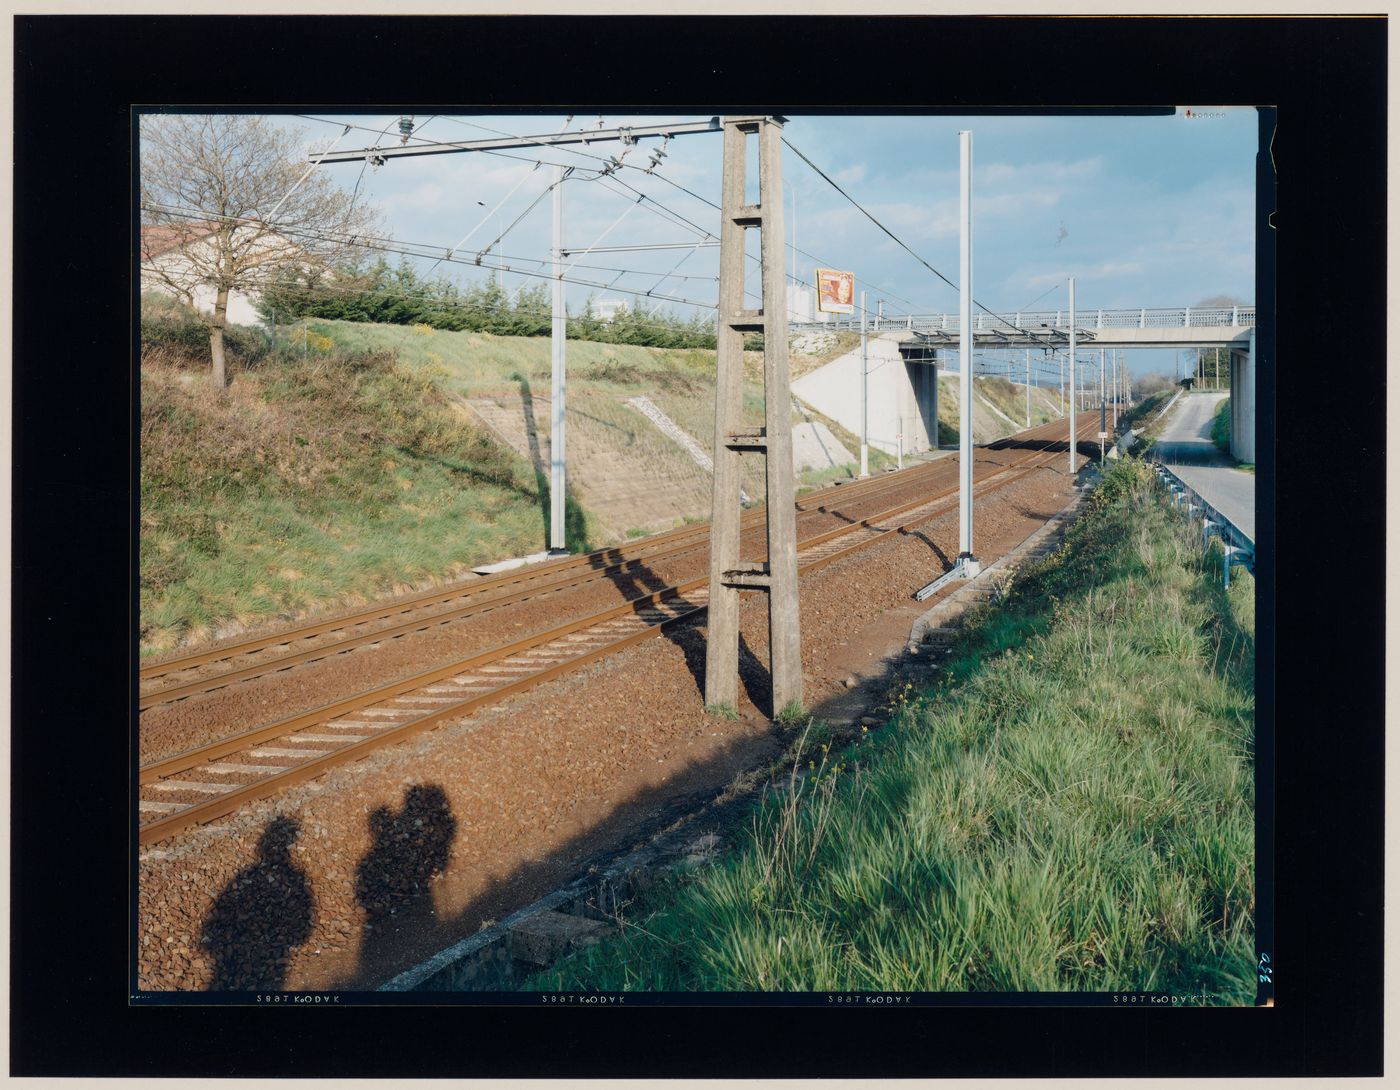 View of tracks and overhead wires for an electric railway, a grassy slope, a bridge and the cast shadows of the photographer and another person, Orthez, France (from the series "In between cities")